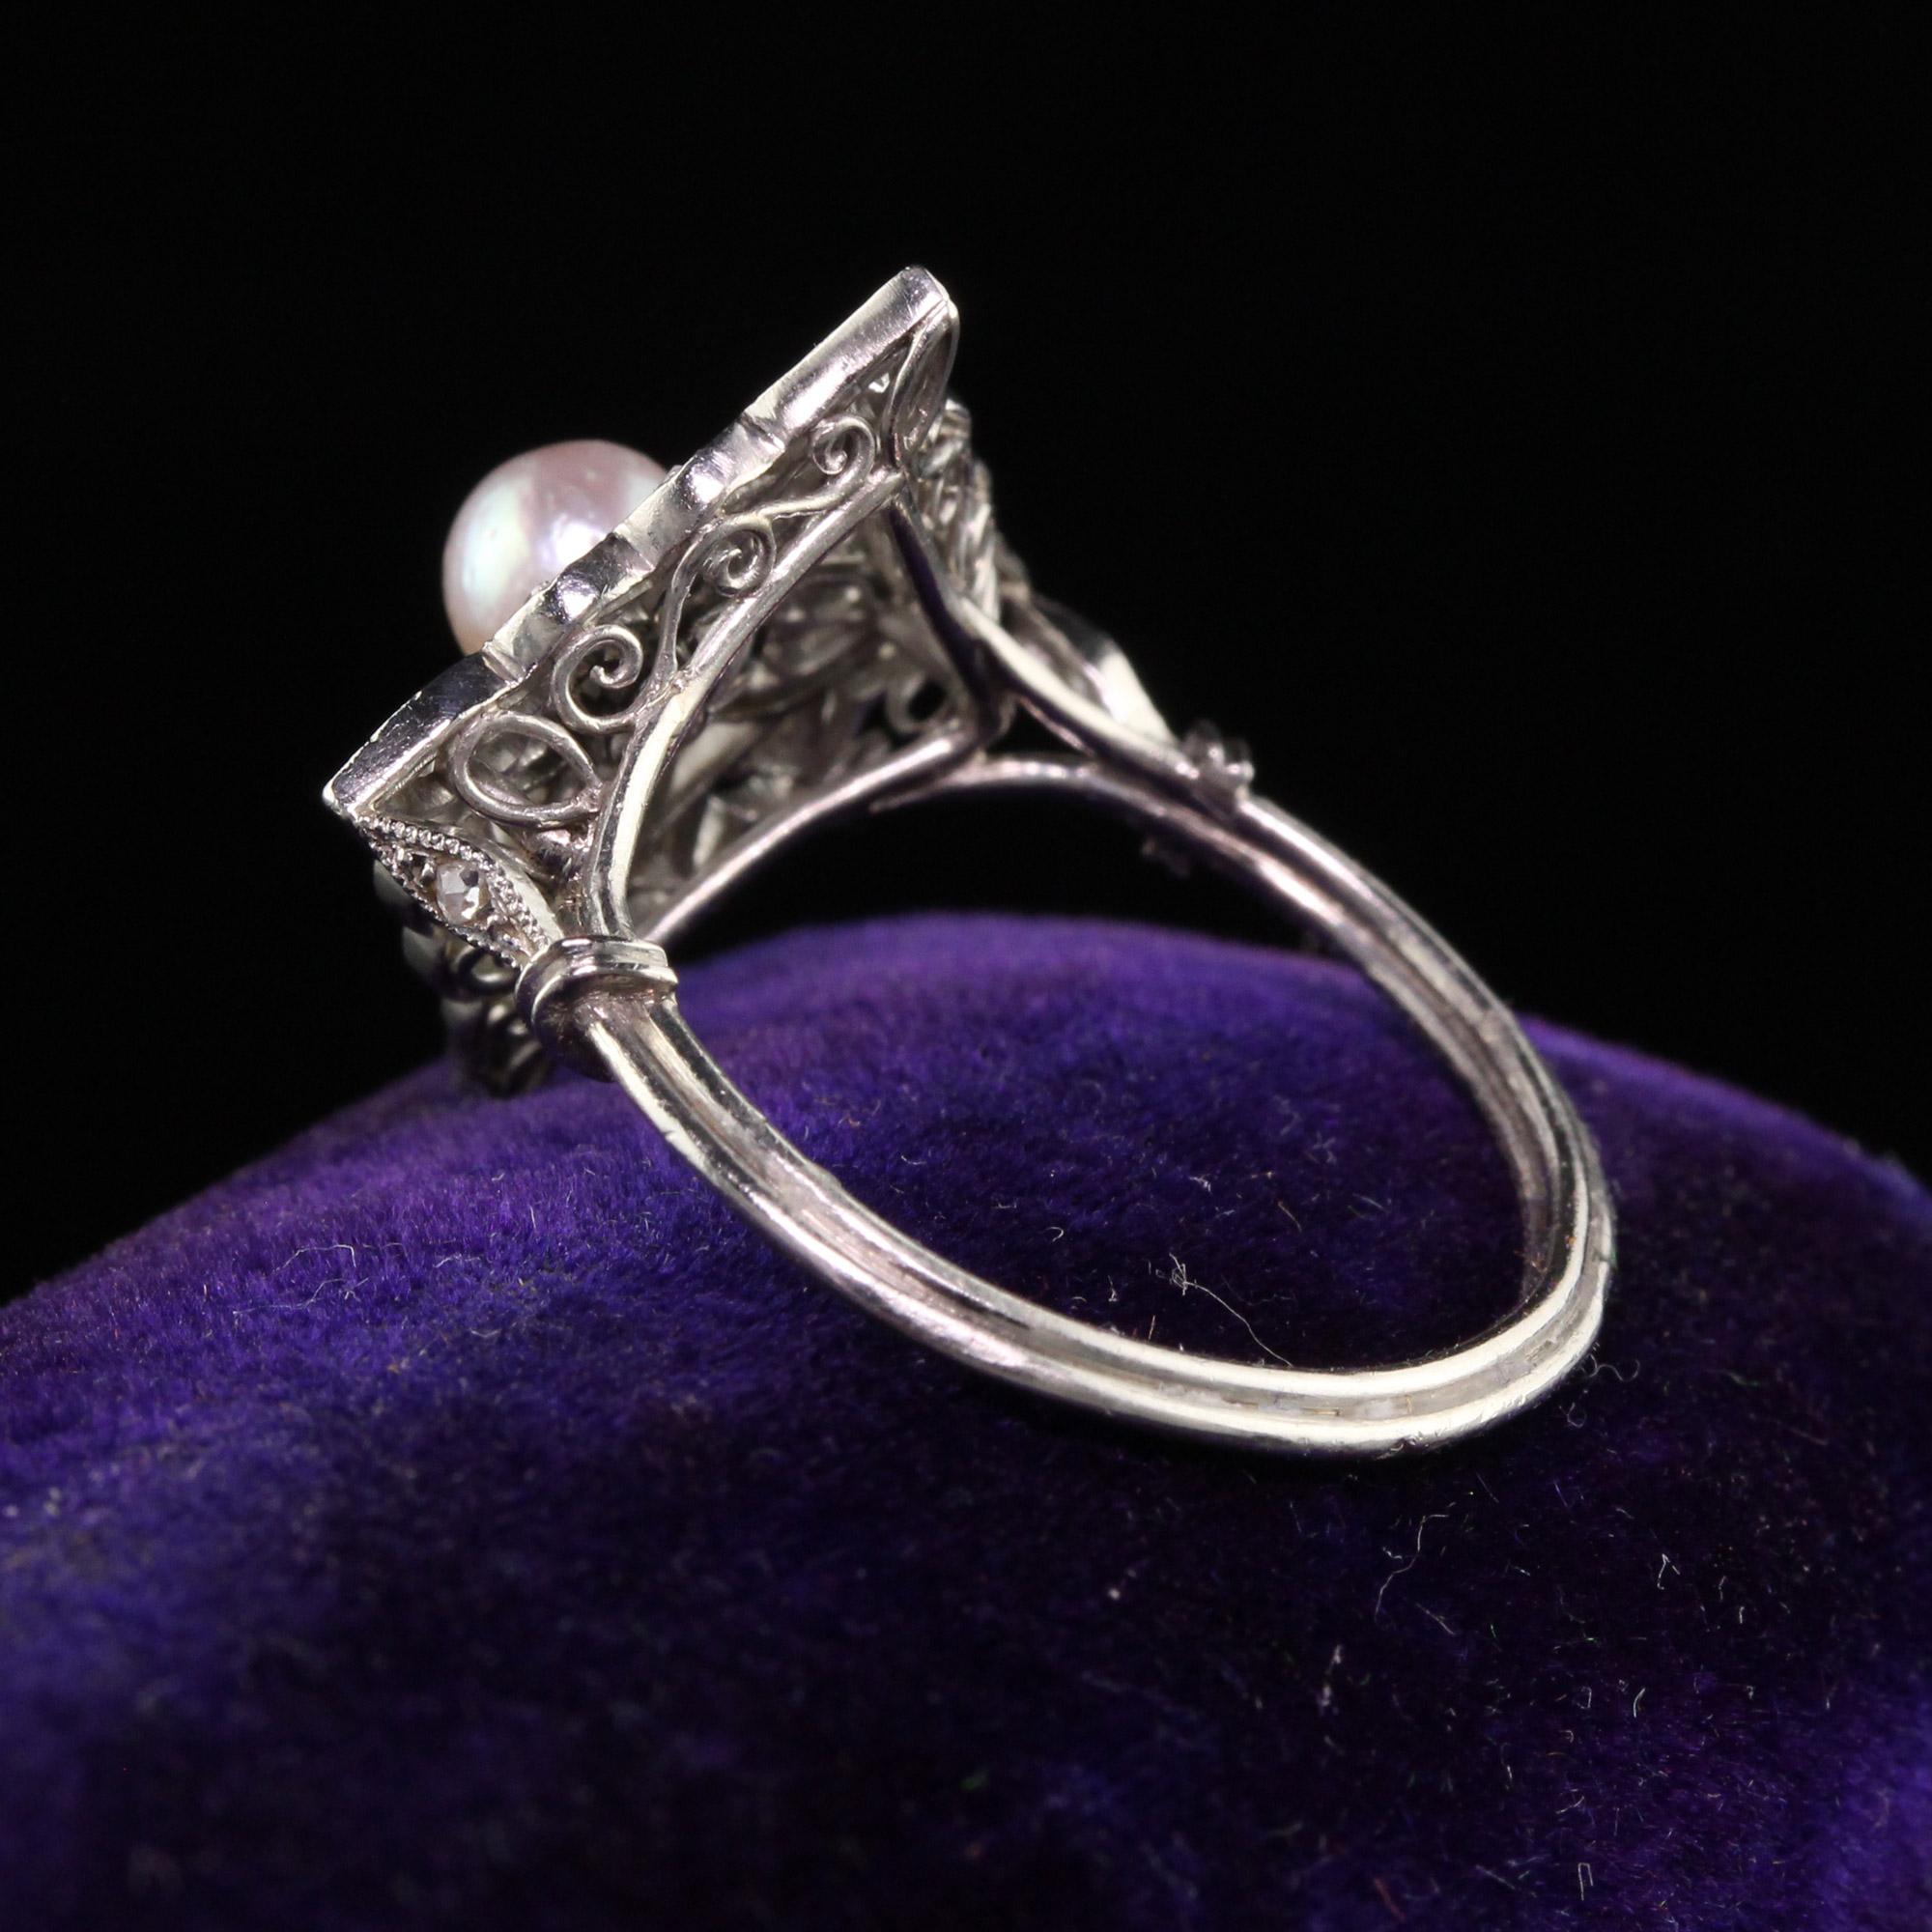 Antique Edwardian French Platinum Rose Cut Diamond Pearl Ring In Good Condition For Sale In Great Neck, NY